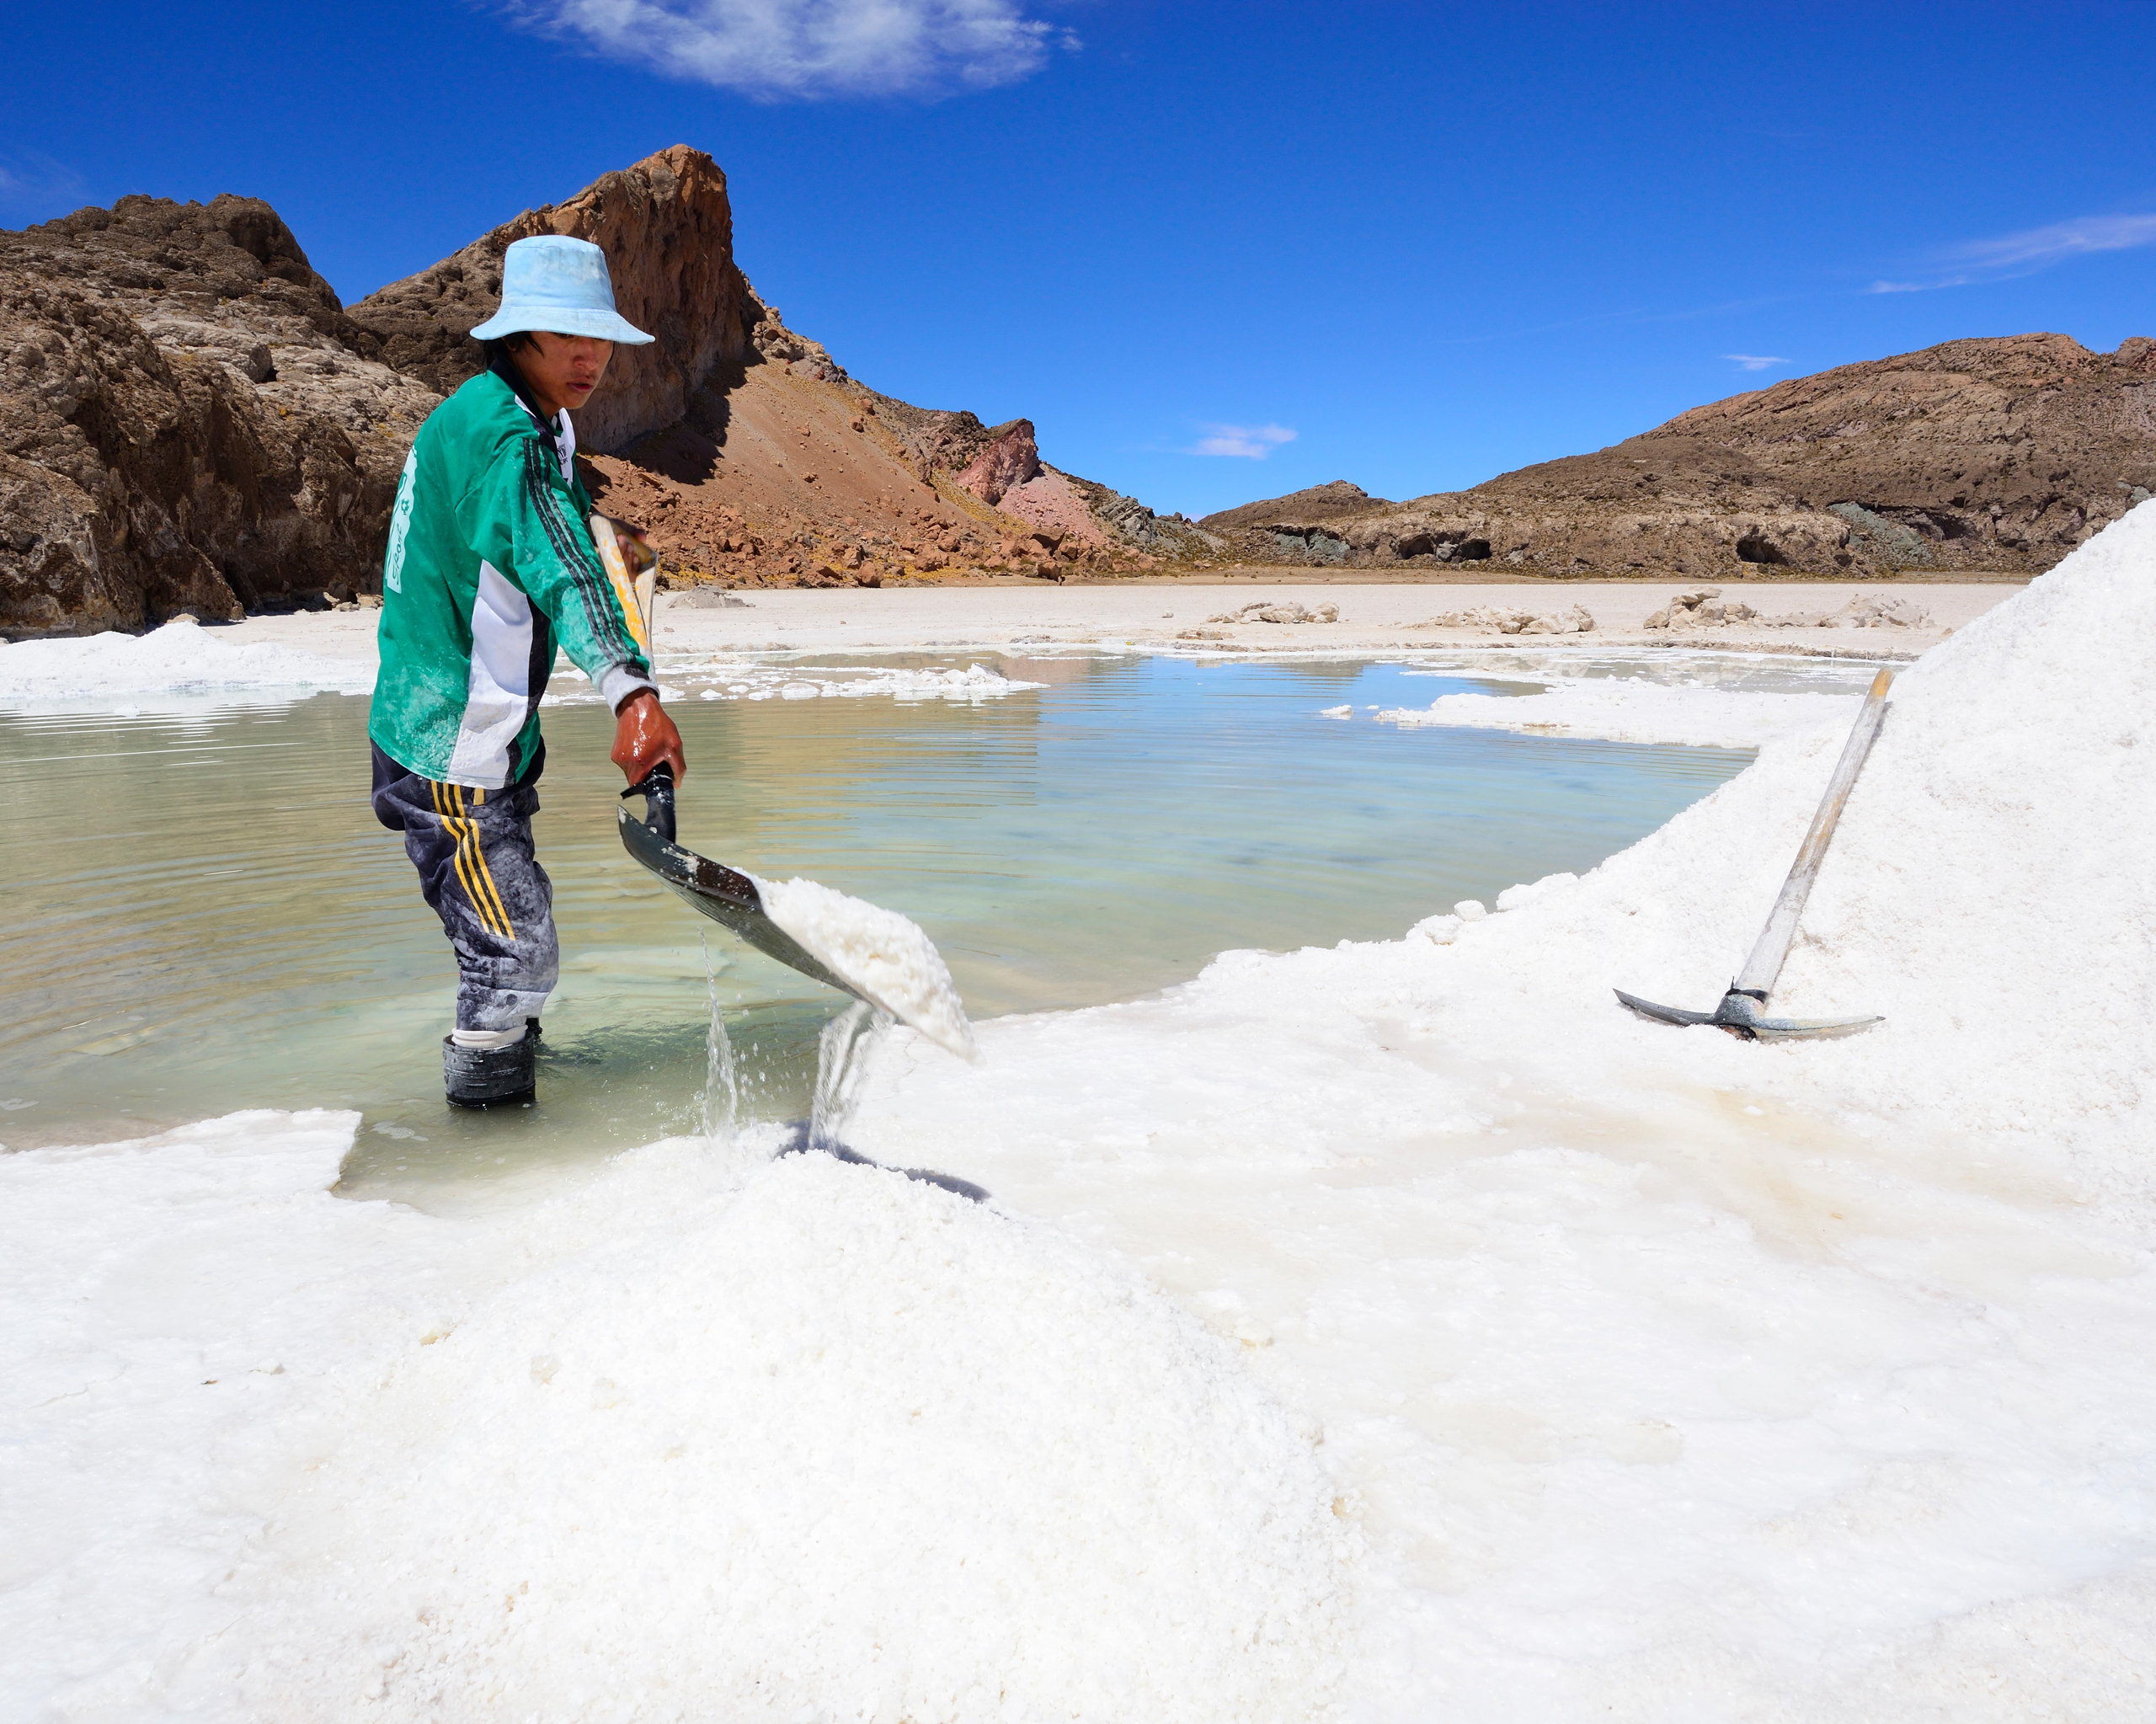 <p><span style="font-weight: 400;">A</span> <span style="font-weight: 400;">worker in Bolivia’s Salar de Uyuni, the world’s largest salt flat. Demand for lithium for use in clean energy technologies is projected to soar, and could make up around 90% of overall demand for the metal by 2040 (Image: Peter Giovannini / ImageBROKER.com / Alamy)</span></p>